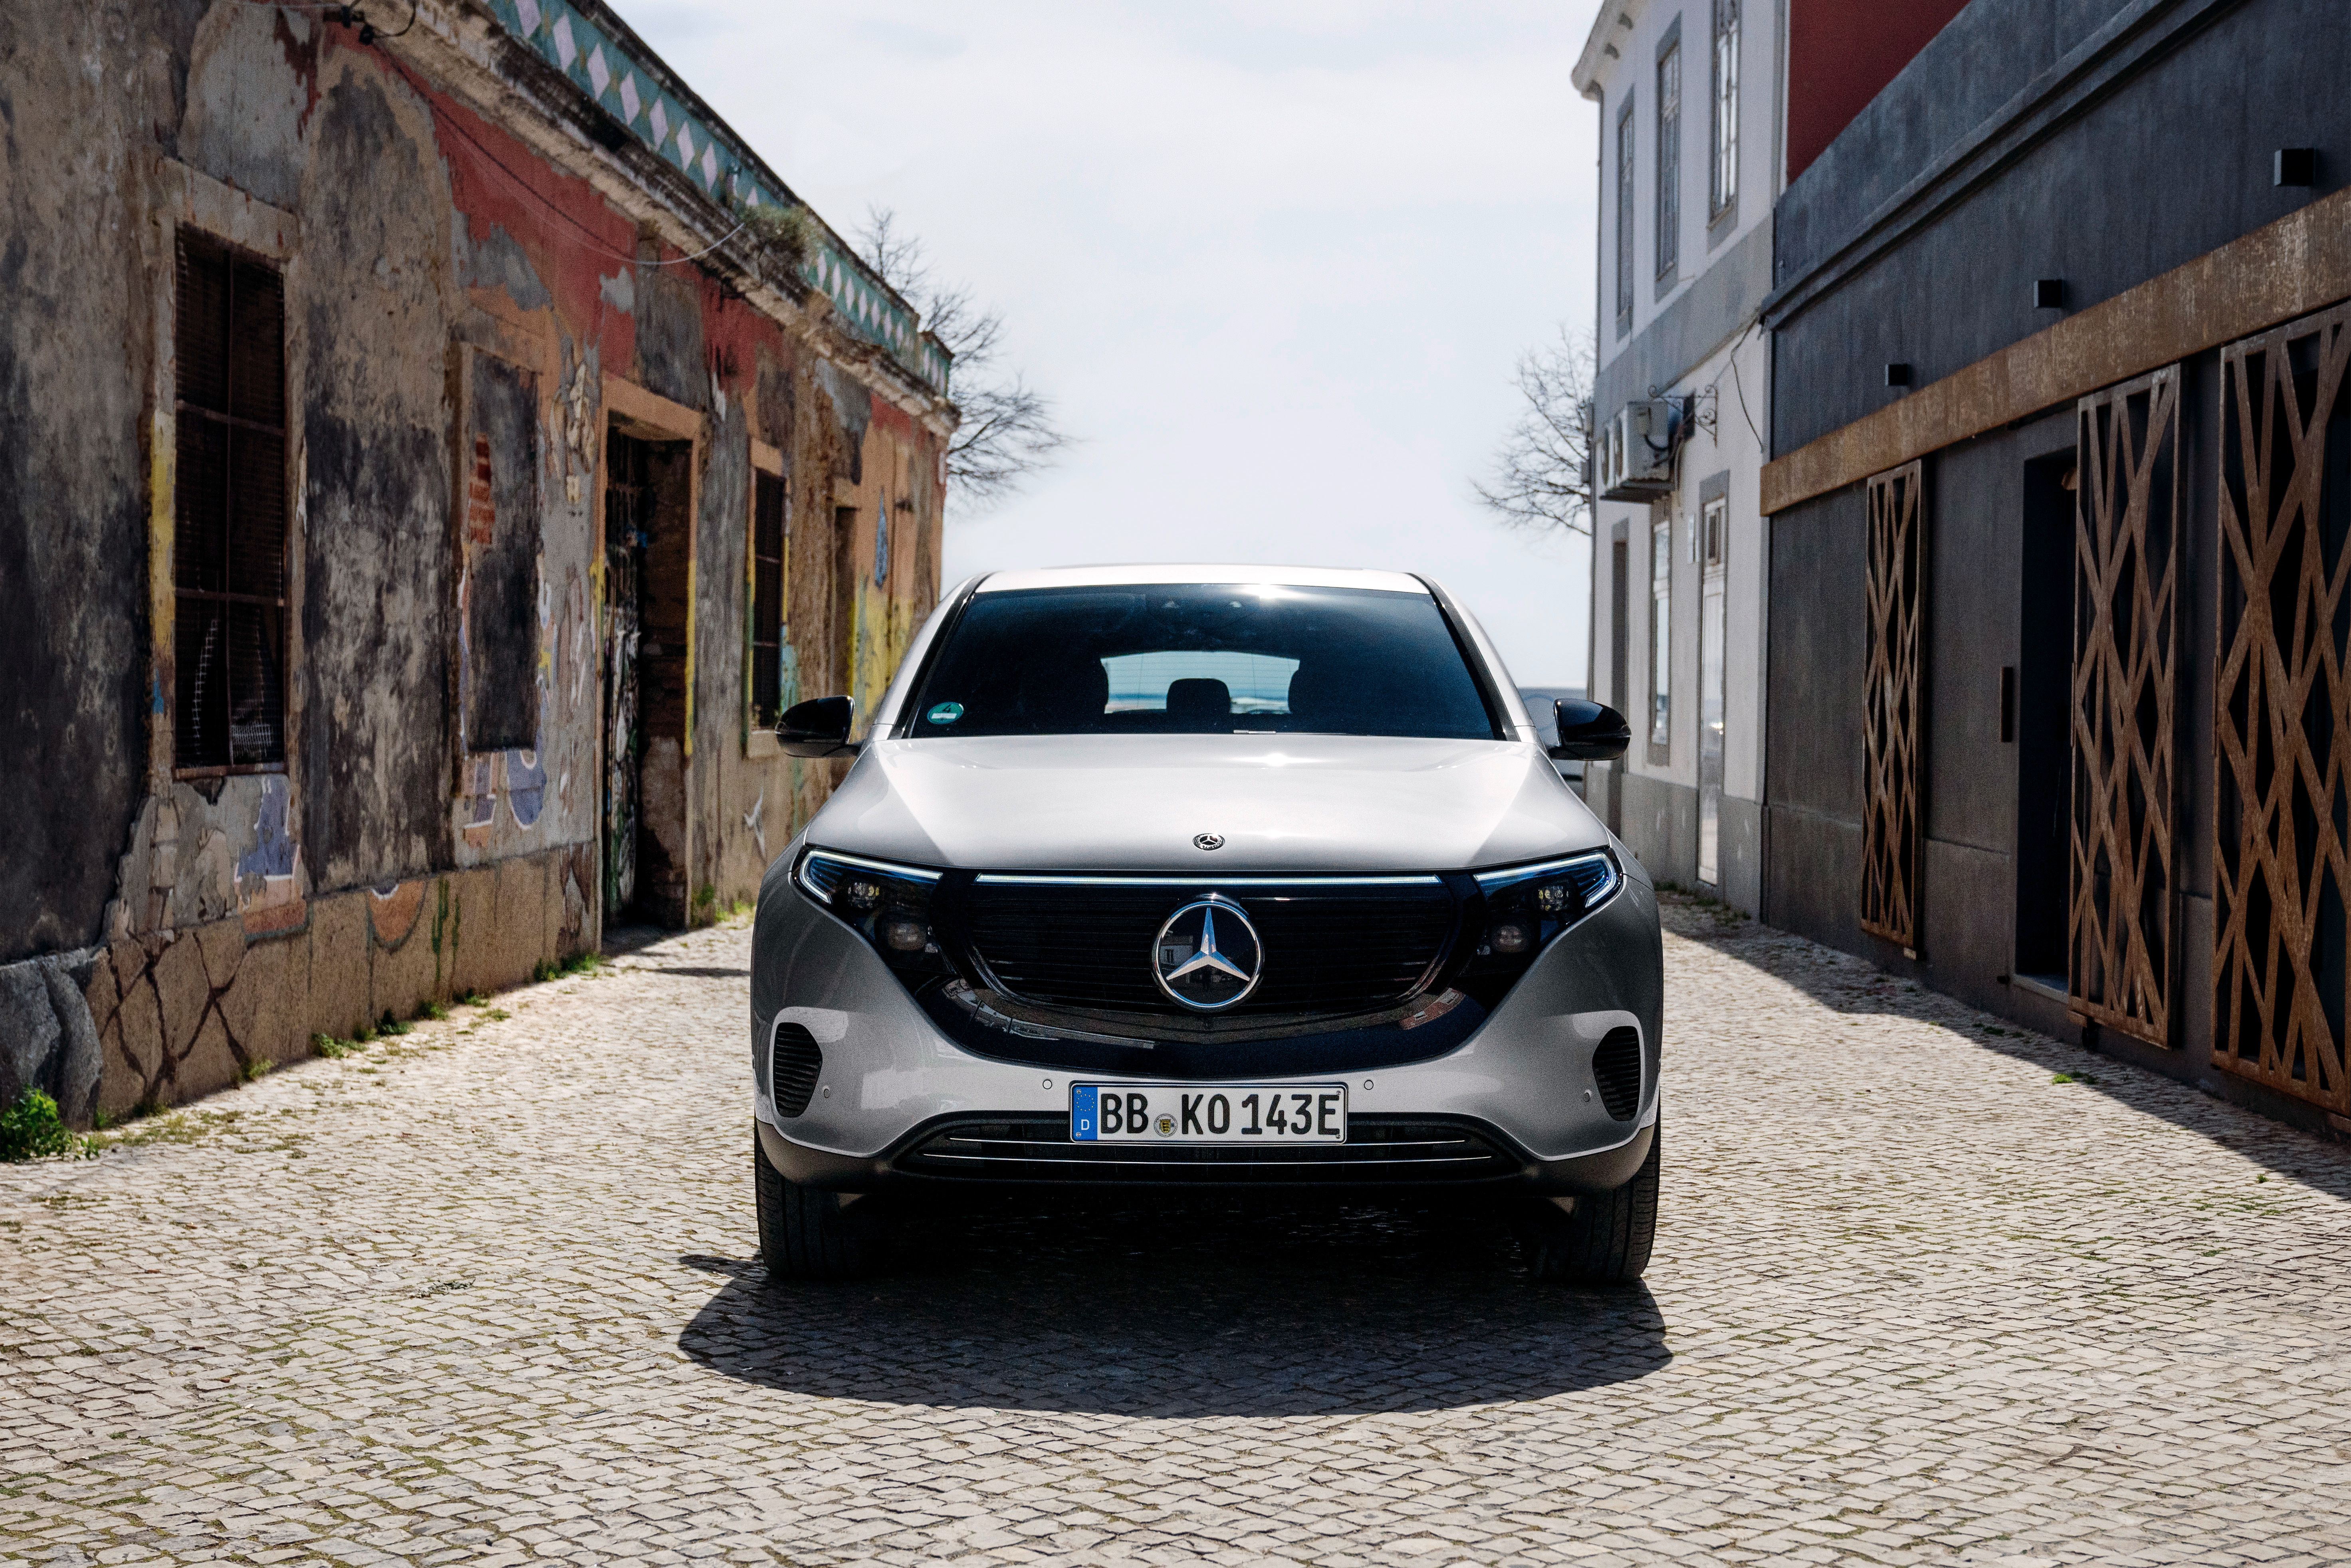 2017 - 2019 Mercedes' EQ Lineup Just Got a Little More Exclusive Thanks to the 2019 Mercedes EQC Edition 1886